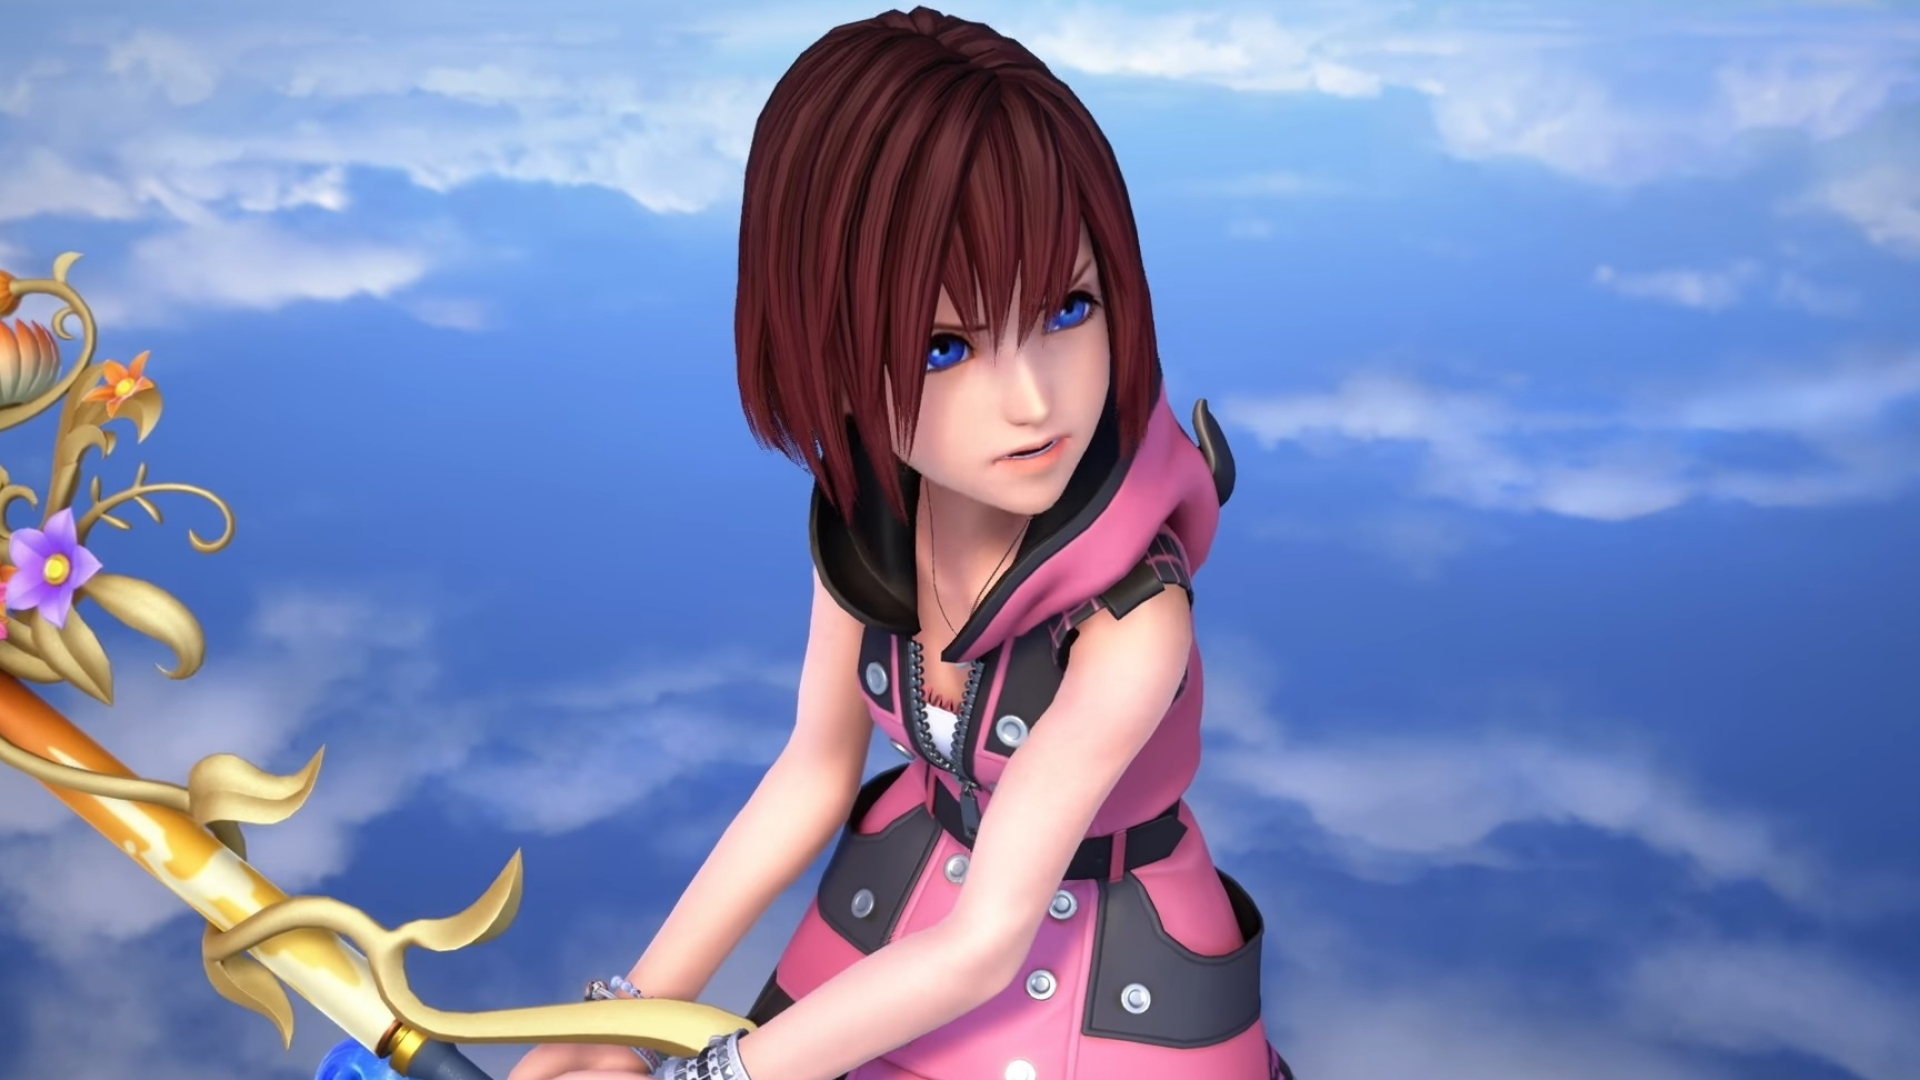 Kairi kingdom hearts anime, Exciting game trailer, Anticipation for new titles, Thrilling adventures, 1920x1080 Full HD Desktop